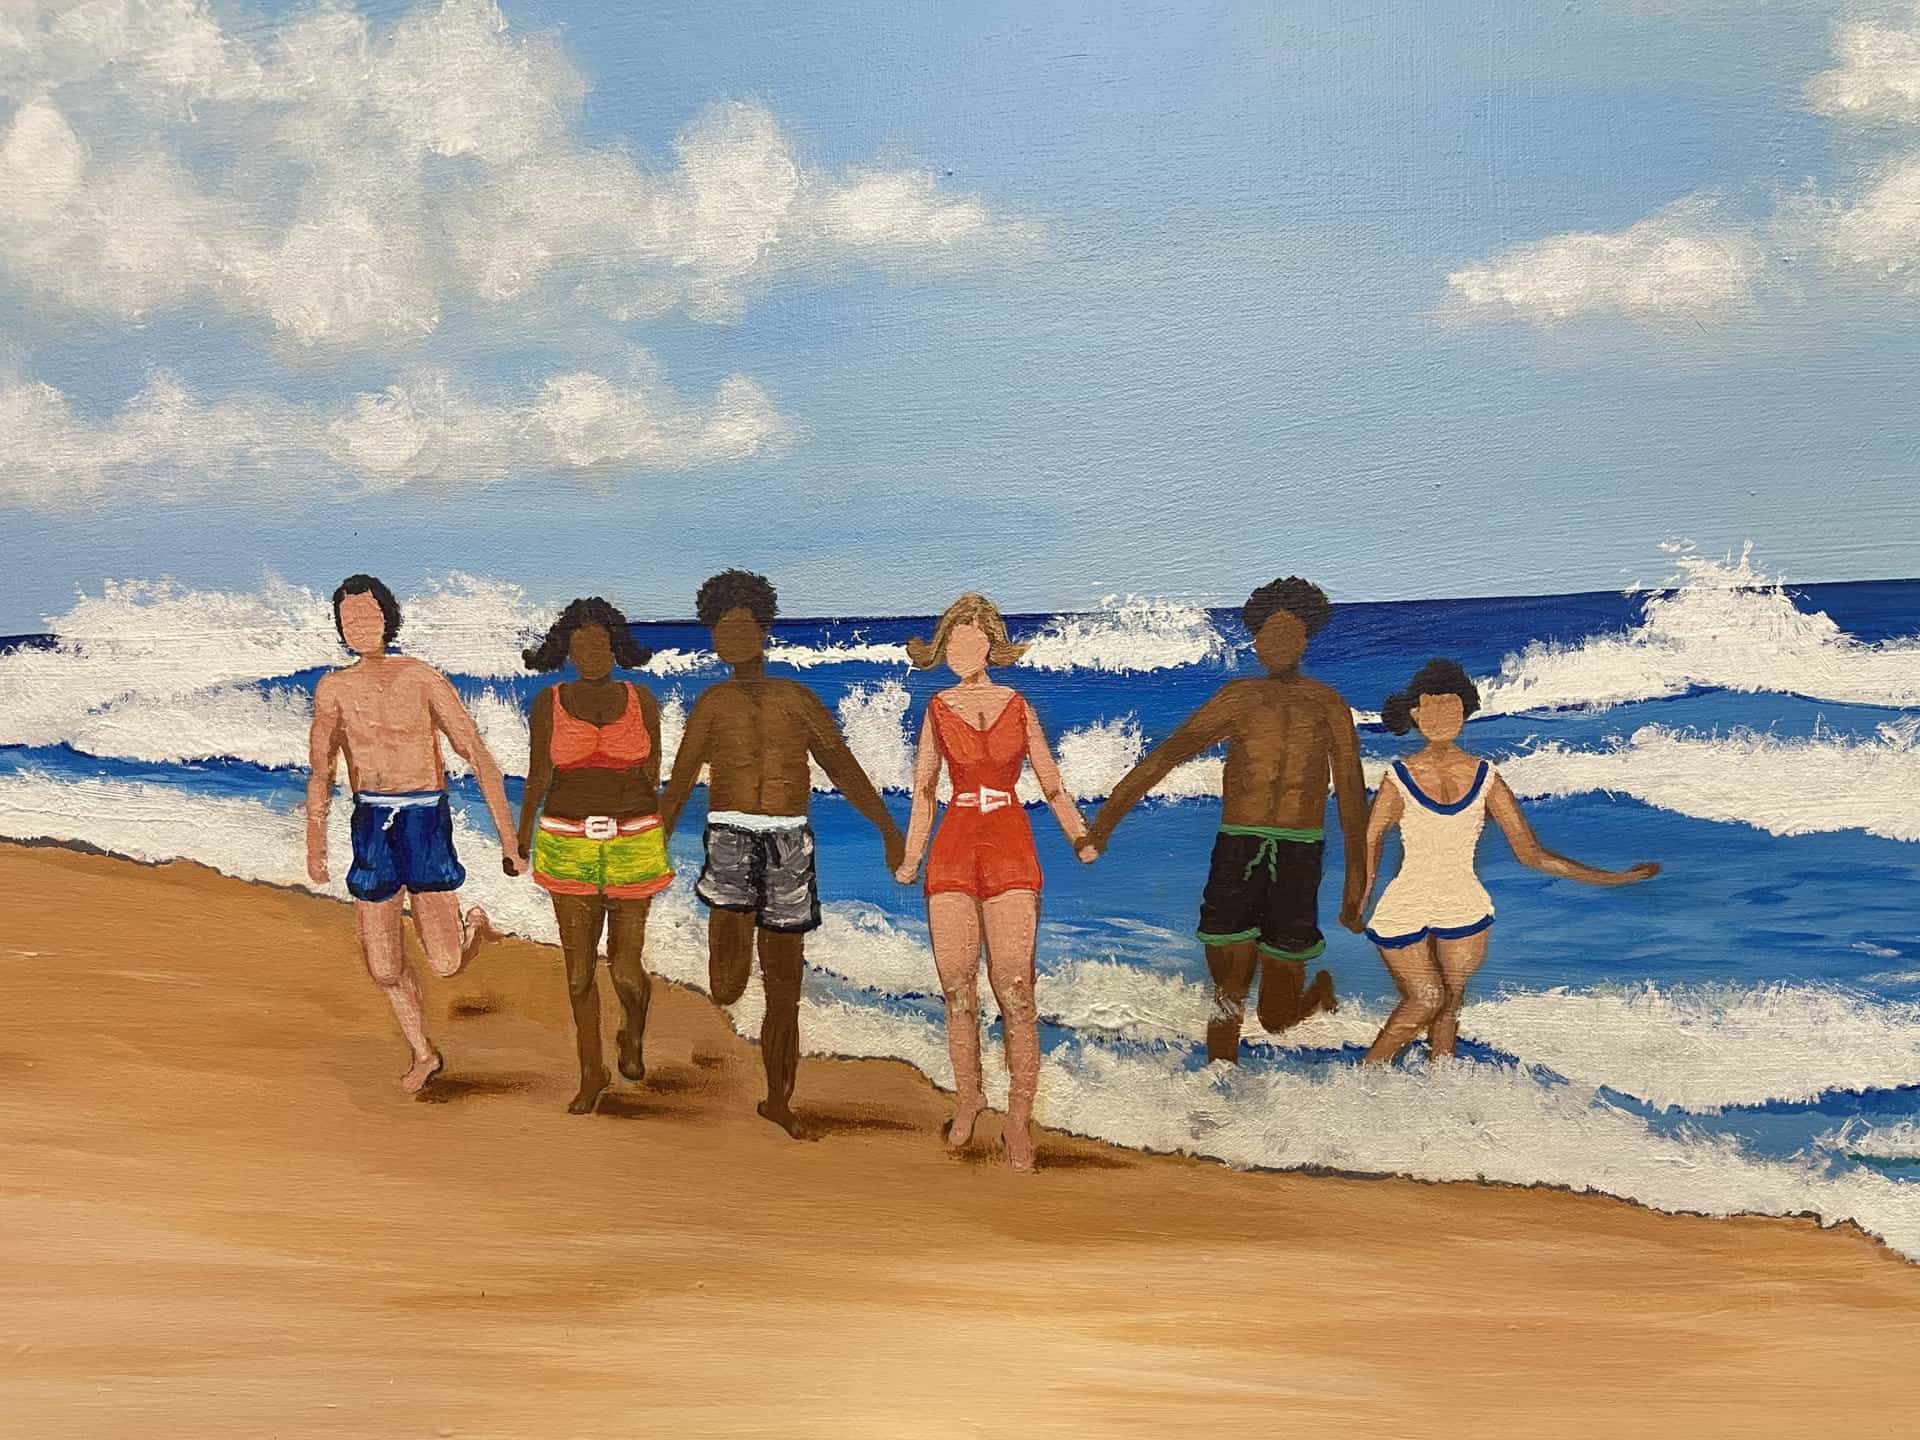 painting of 6 diverse, faceless people holding hands walking on the beach